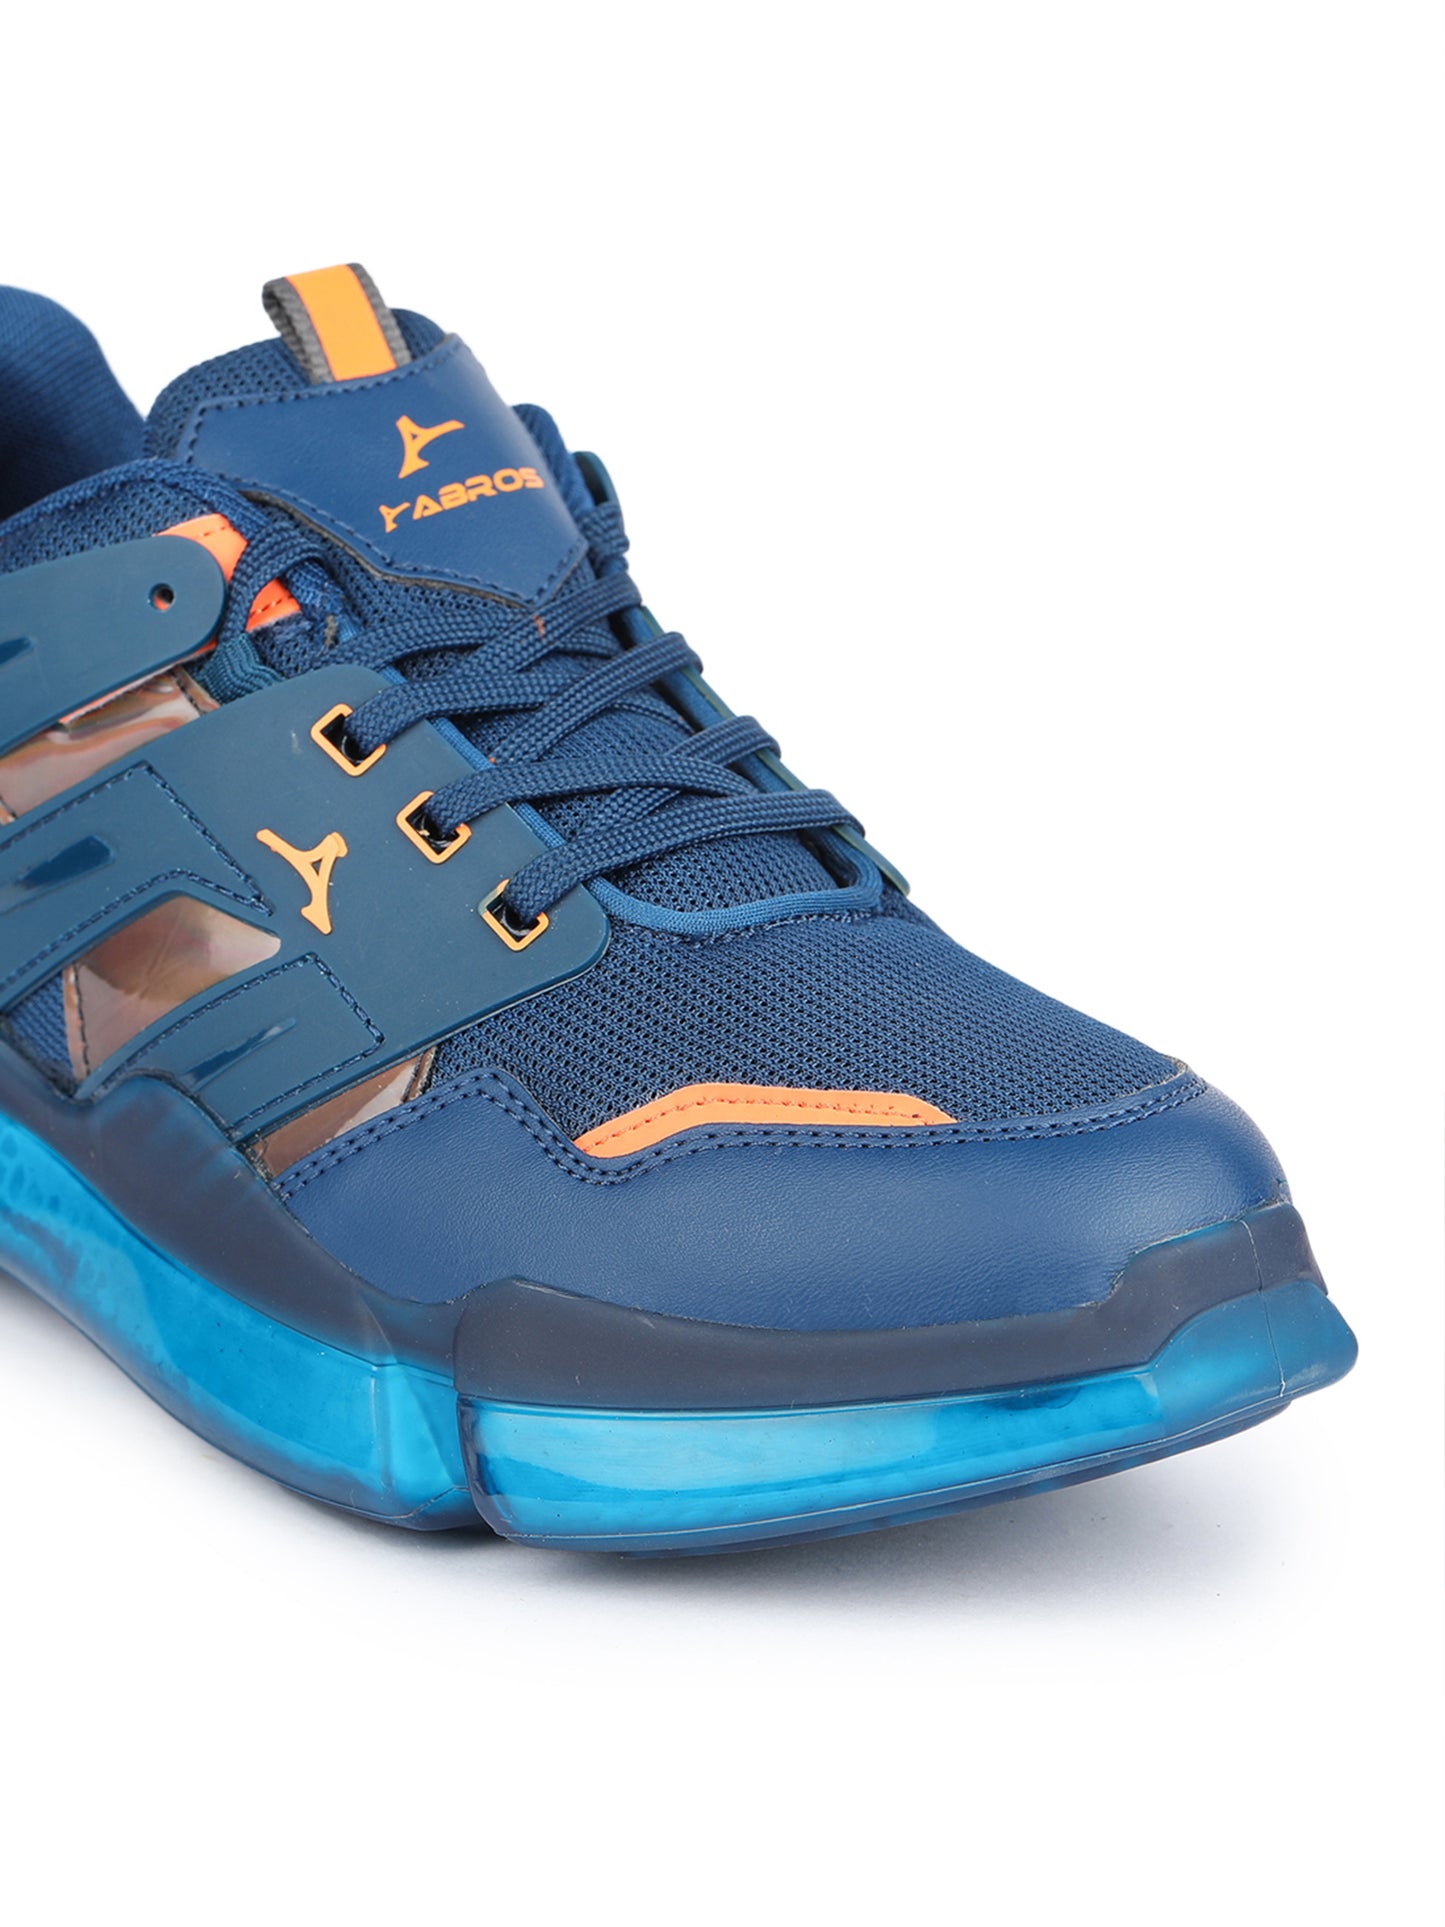 ABROS HECTOR SPORTS SHOES FOR MEN